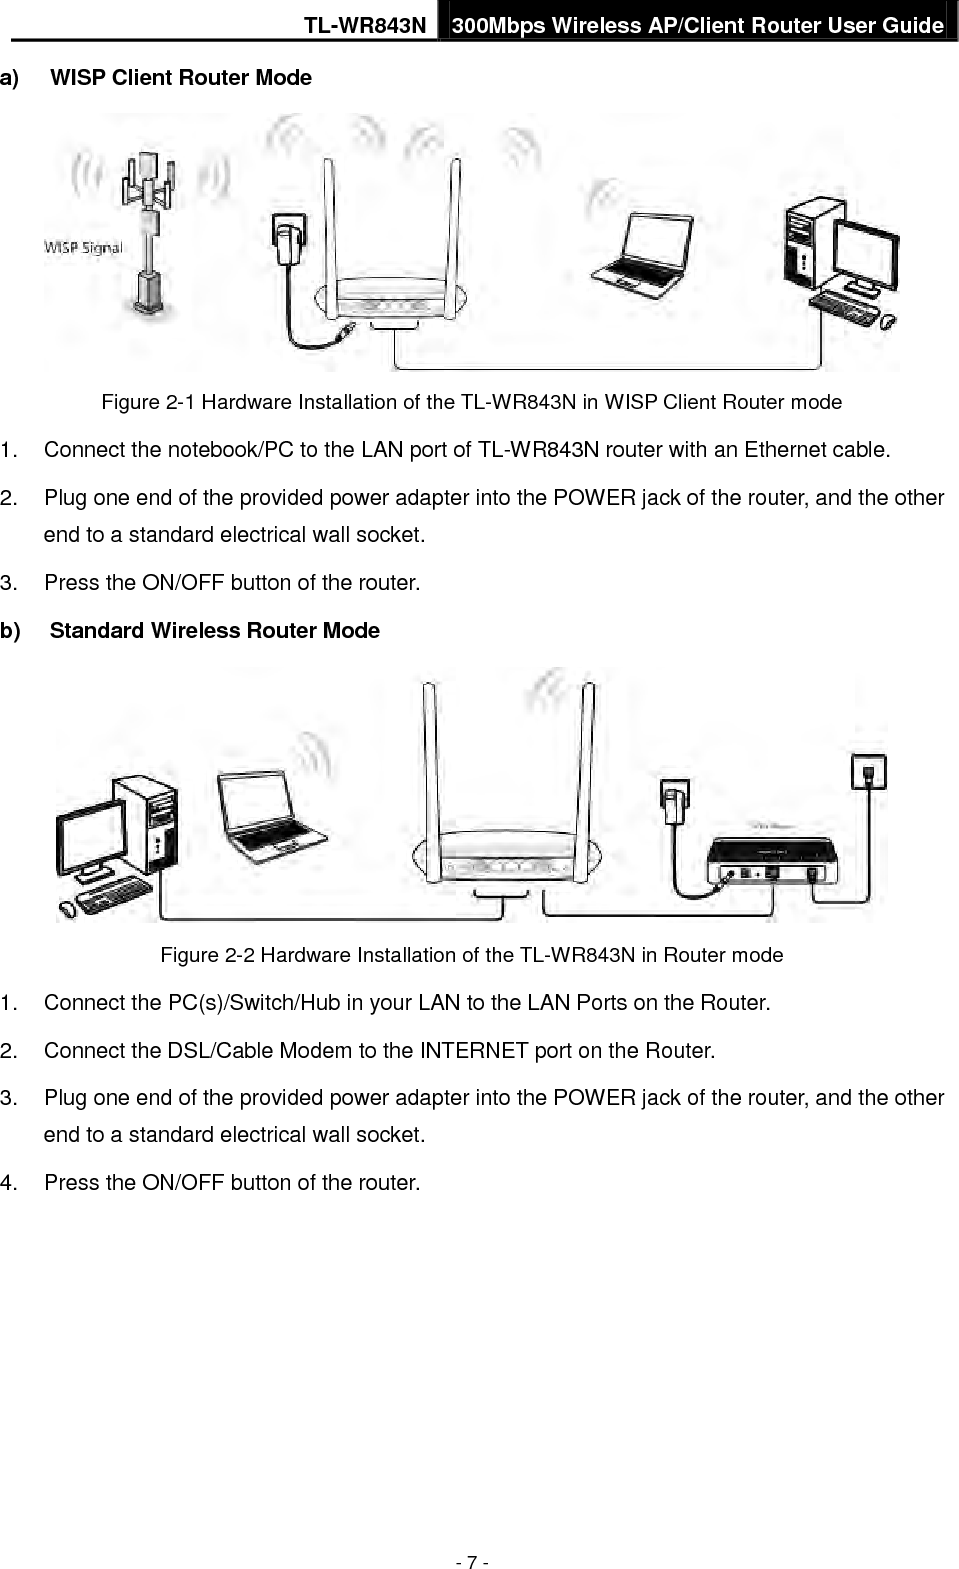 TL-WR843N 300Mbps Wireless AP/Client Router User Guide - 7 - a) WISP Client Router ModeFigure 2-1 Hardware Installation of the TL-WR843N in WISP Client Router mode 1. Connect the notebook/PC to the LAN port of TL-WR843N router with an Ethernet cable.2. Plug one end of the provided power adapter into the POWER jack of the router, and the otherend to a standard electrical wall socket.3. Press the ON/OFF button of the router.b) Standard Wireless Router ModeFigure 2-2 Hardware Installation of the TL-WR843N in Router mode 1. Connect the PC(s)/Switch/Hub in your LAN to the LAN Ports on the Router.2. Connect the DSL/Cable Modem to the INTERNET port on the Router.3. Plug one end of the provided power adapter into the POWER jack of the router, and the otherend to a standard electrical wall socket.4. Press the ON/OFF button of the router.